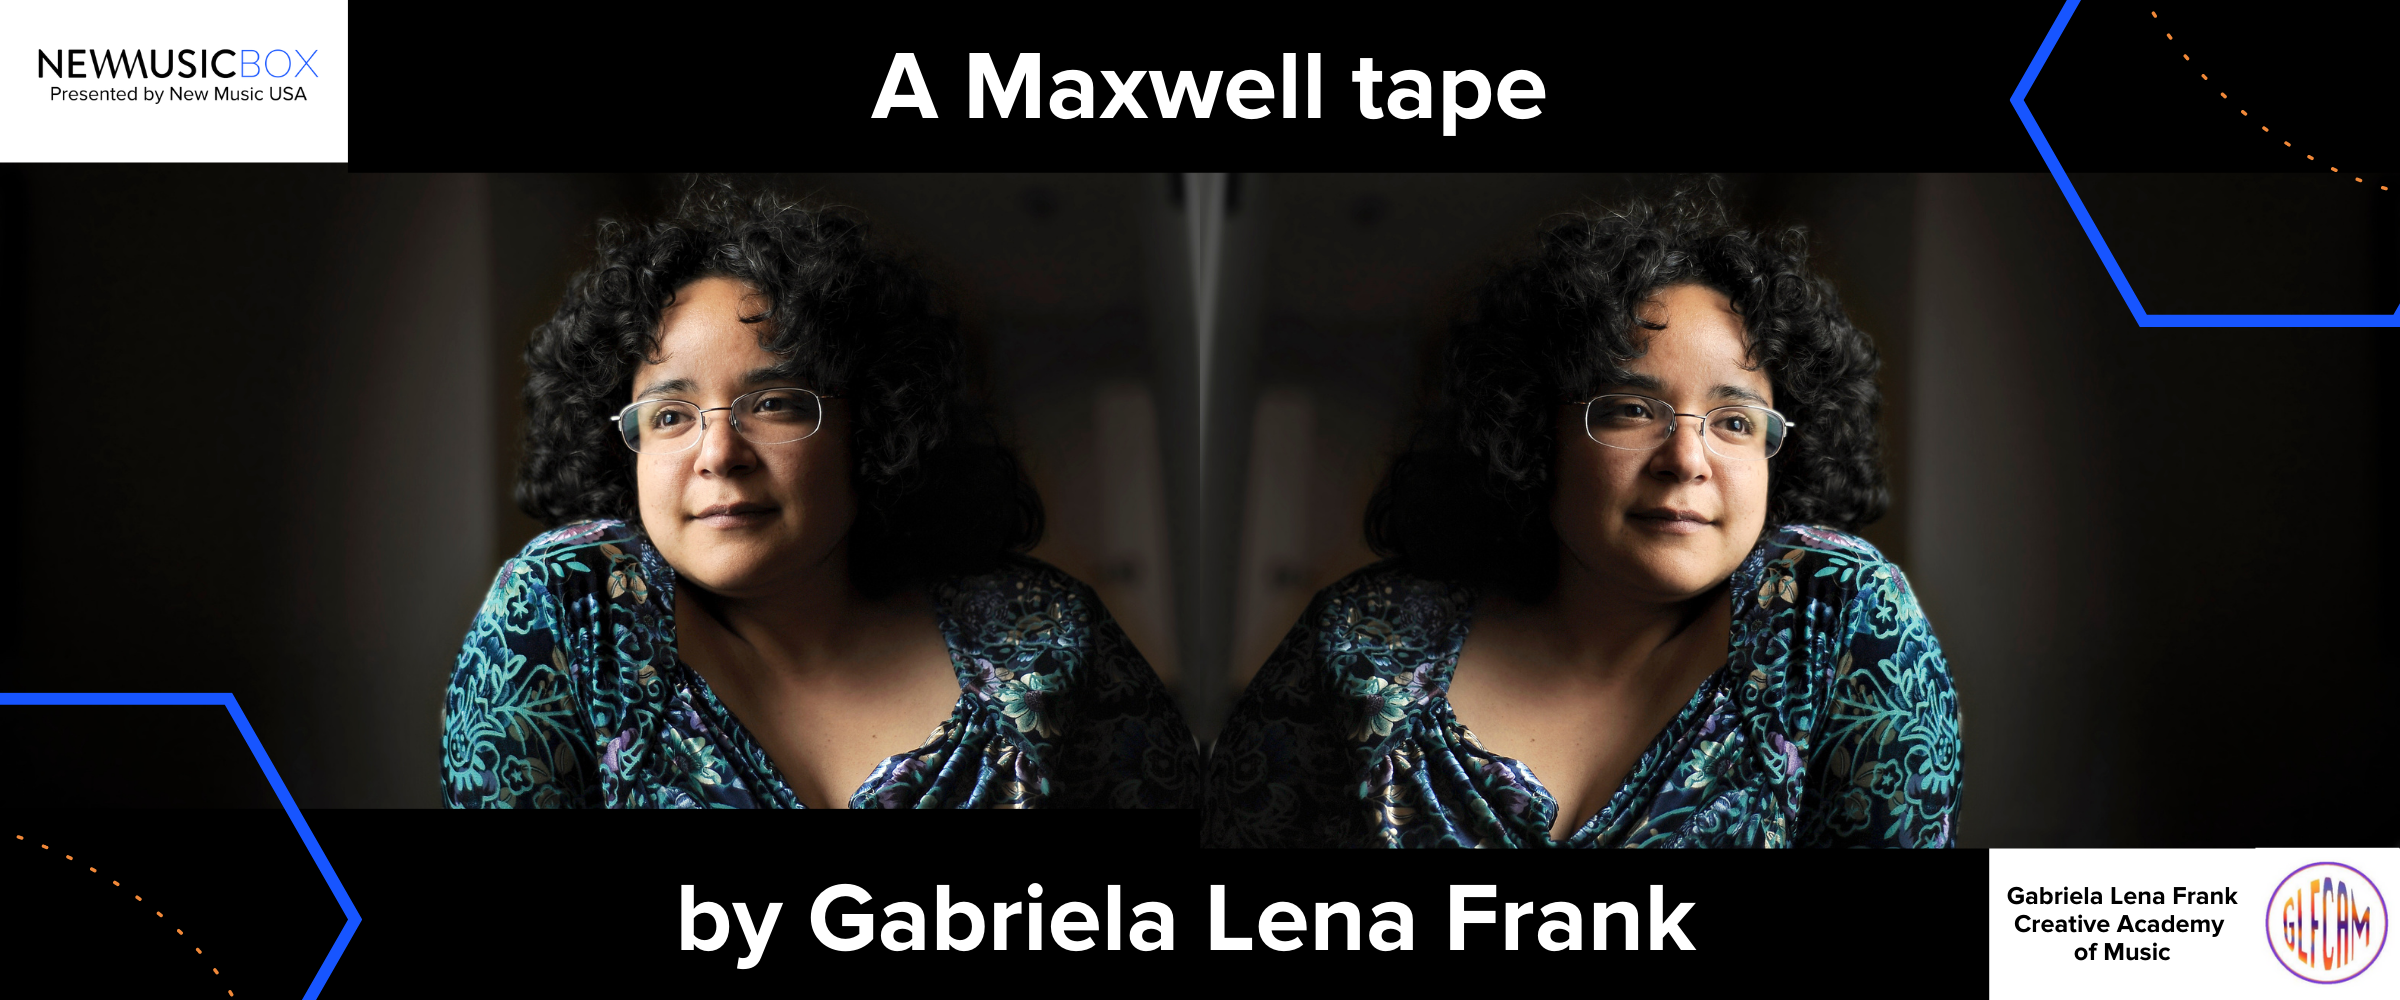 A double image of Gabriela Lena Frank with New Music USA and GLFCAM Guest Editor-branded logos